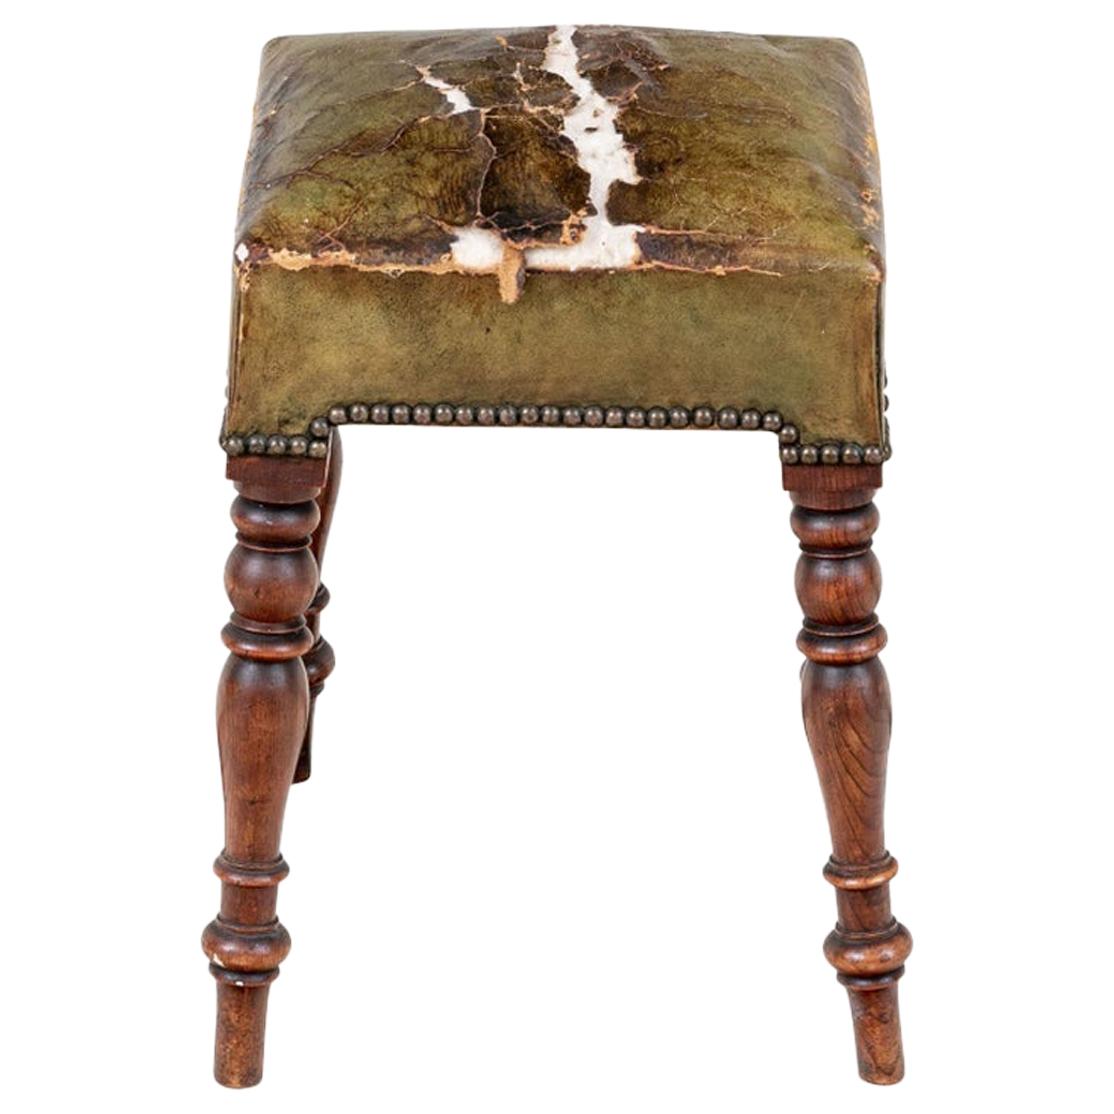 Antique Turned Leg Leather Covered Stool